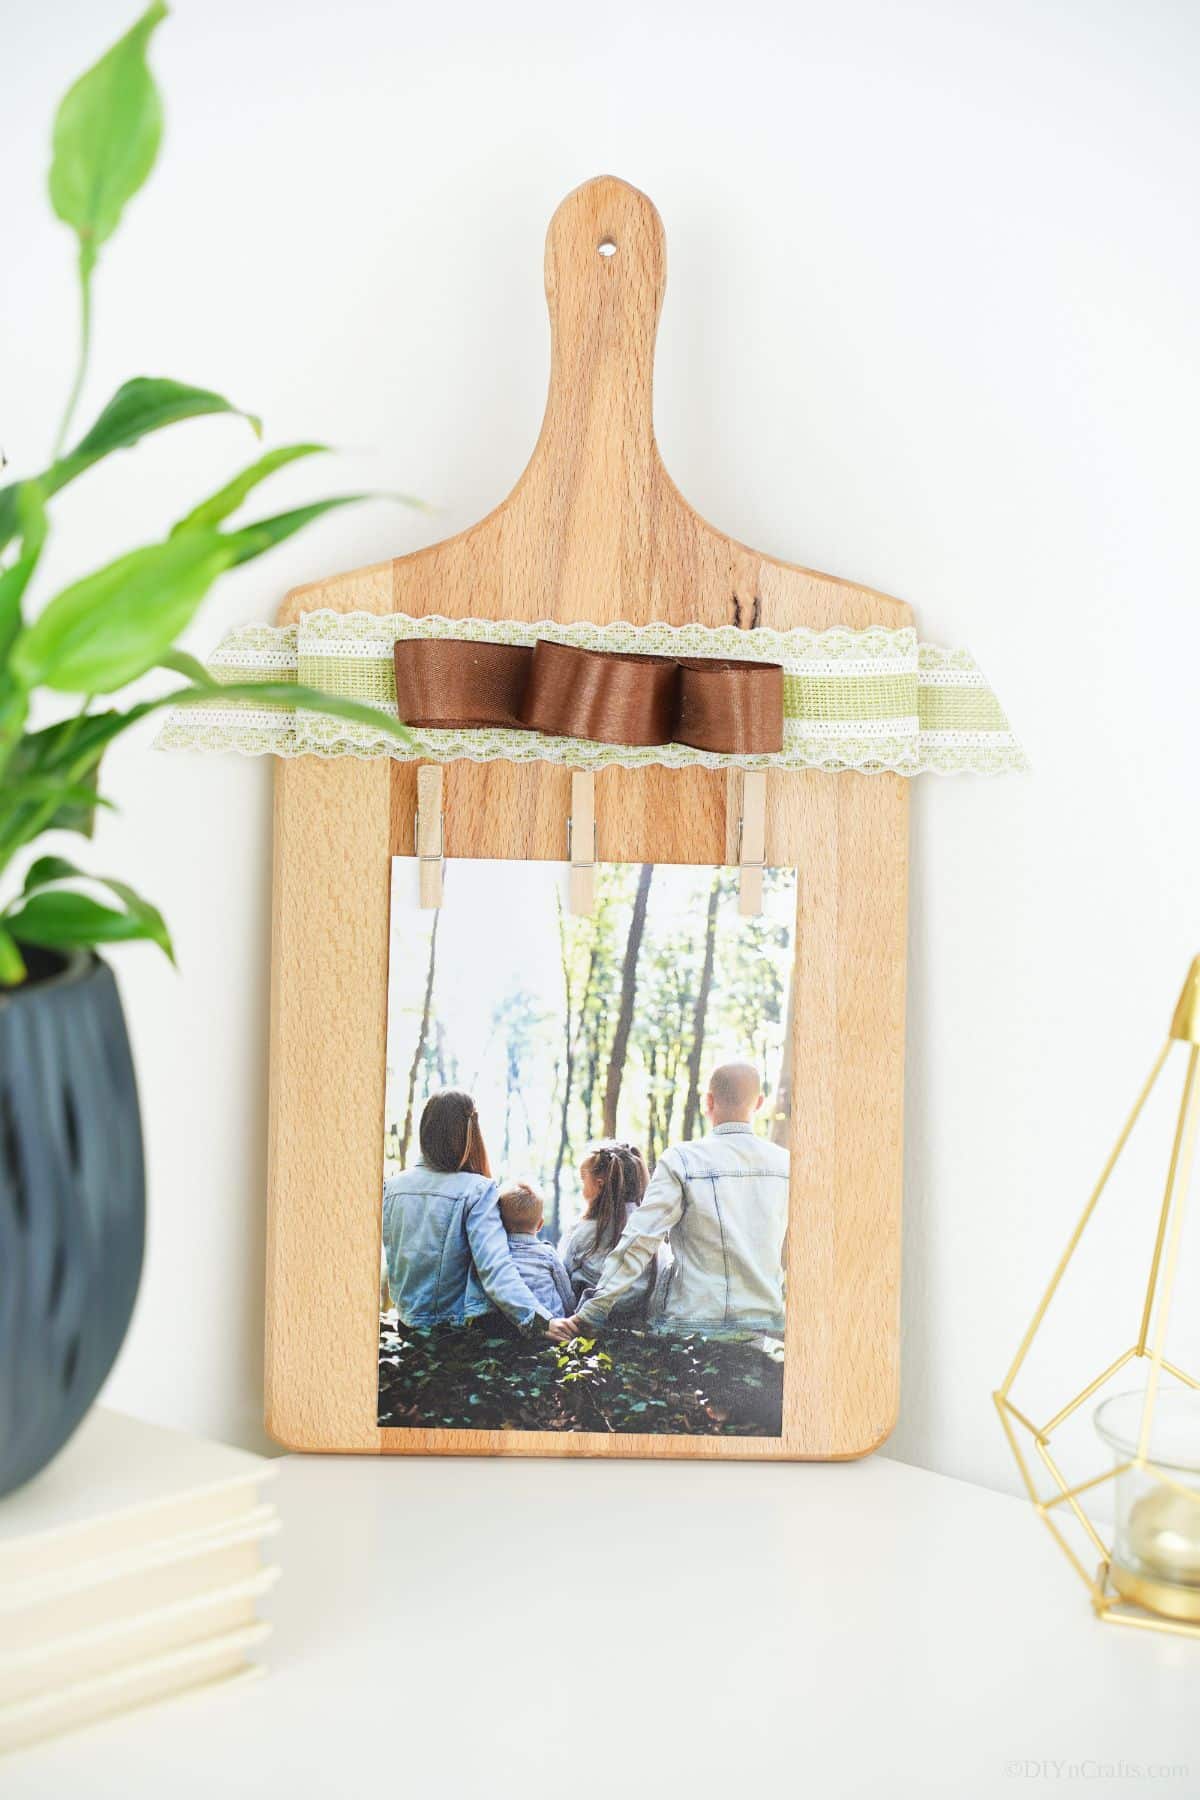 photo board made of cutting board on table by blue potted plant